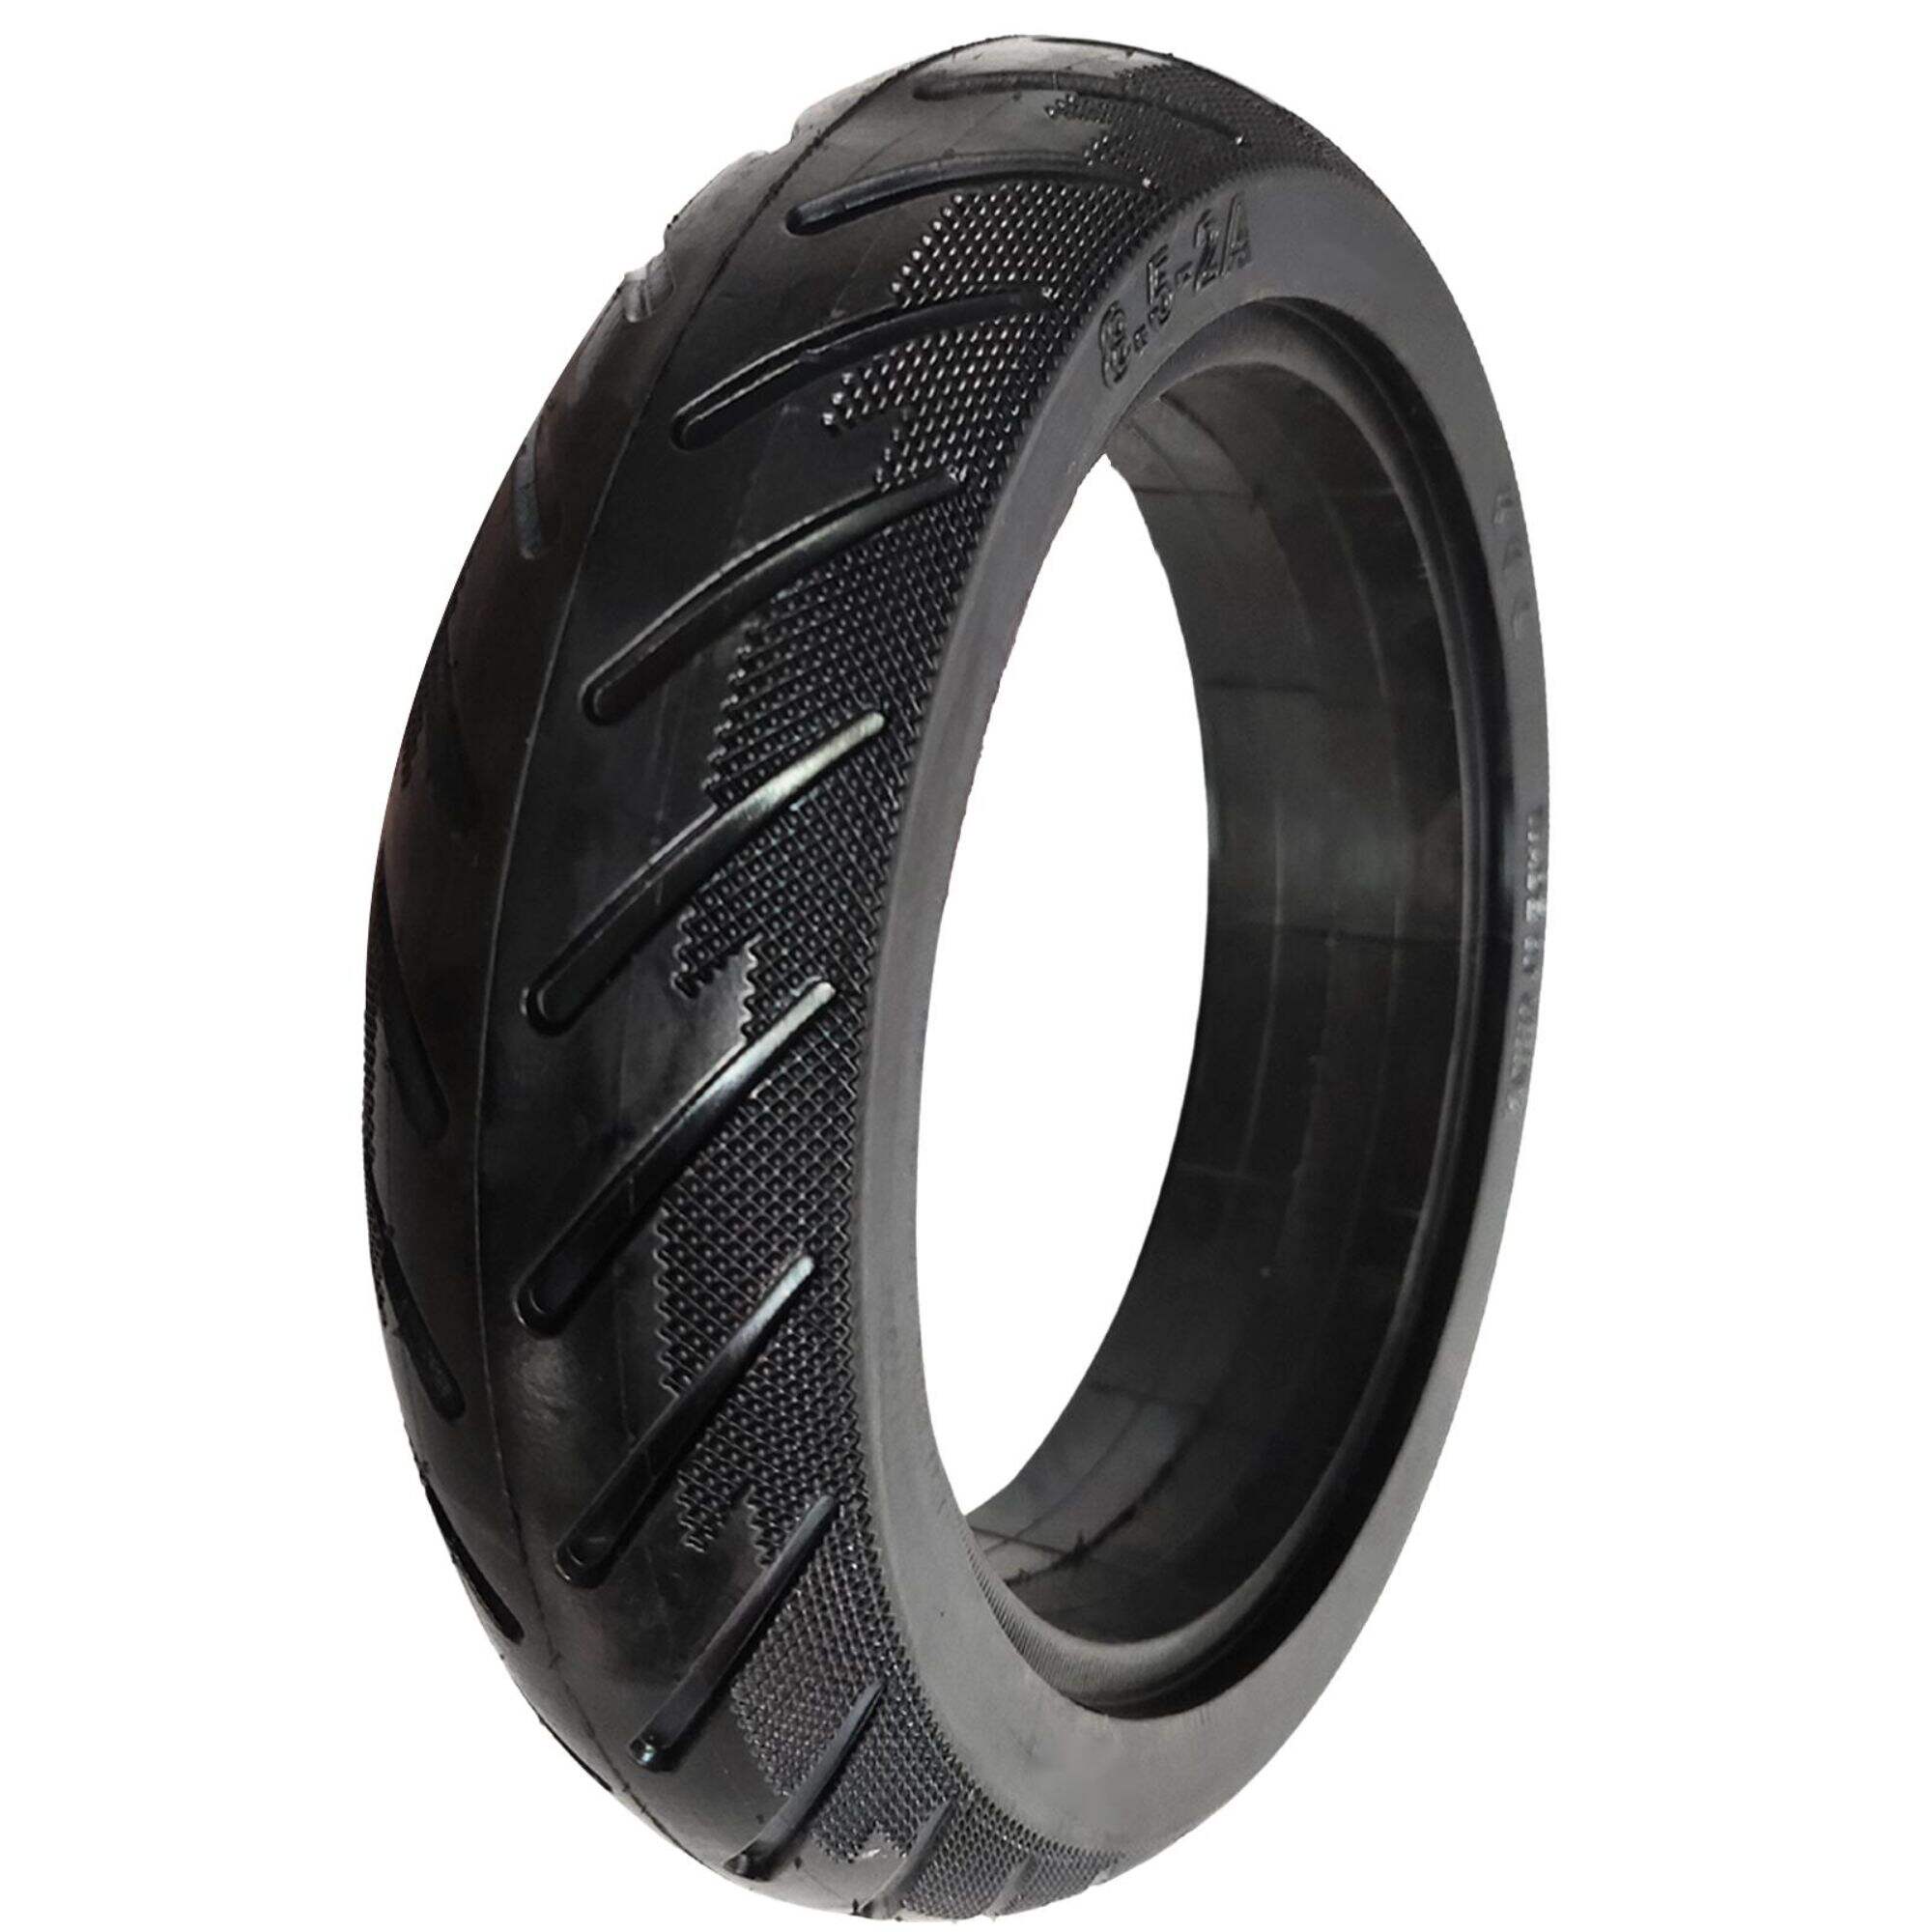 8.5“ 8.5-2A Flat-Free Semi-Pneumatic Rubber Tire, 8.5 inch Electric Scooter Replacement Tire